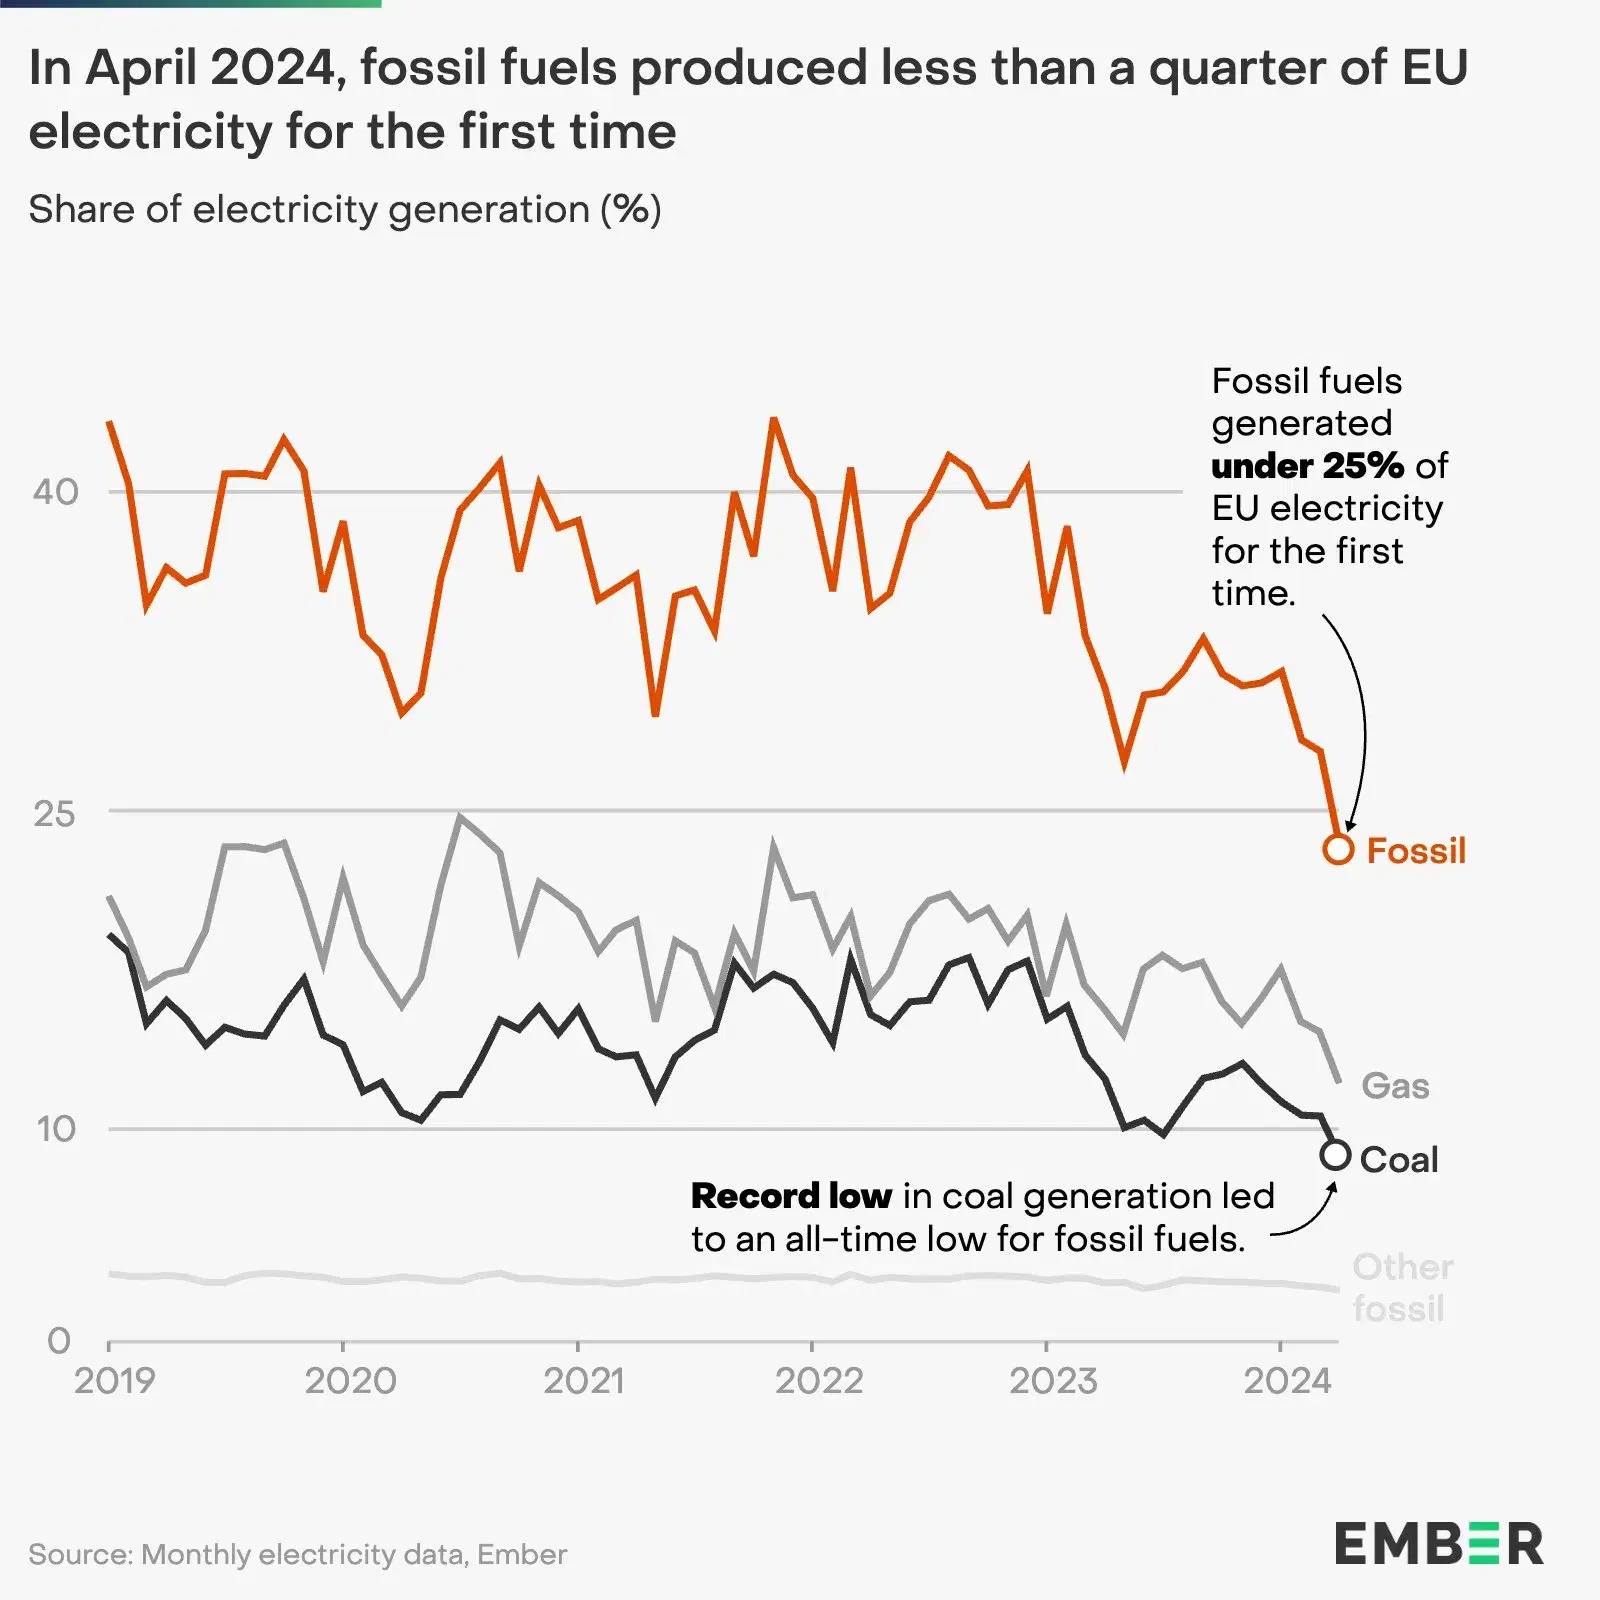 Fossil Fuels Produced Less than 25% of EU Electricity for First Month Ever